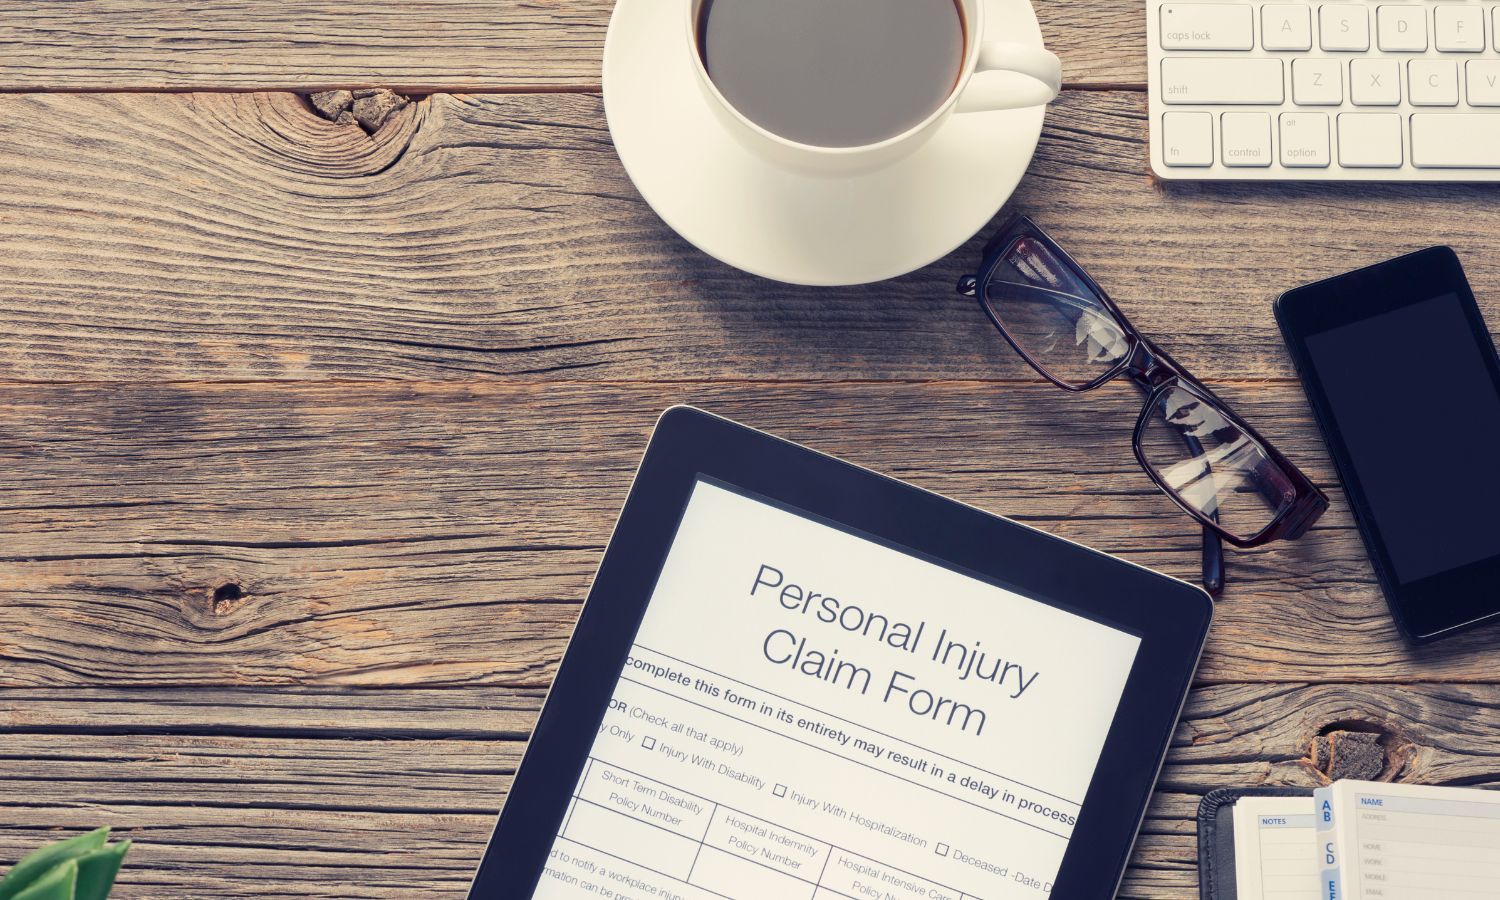 Bringing a personal injury claim – Common misconceptions